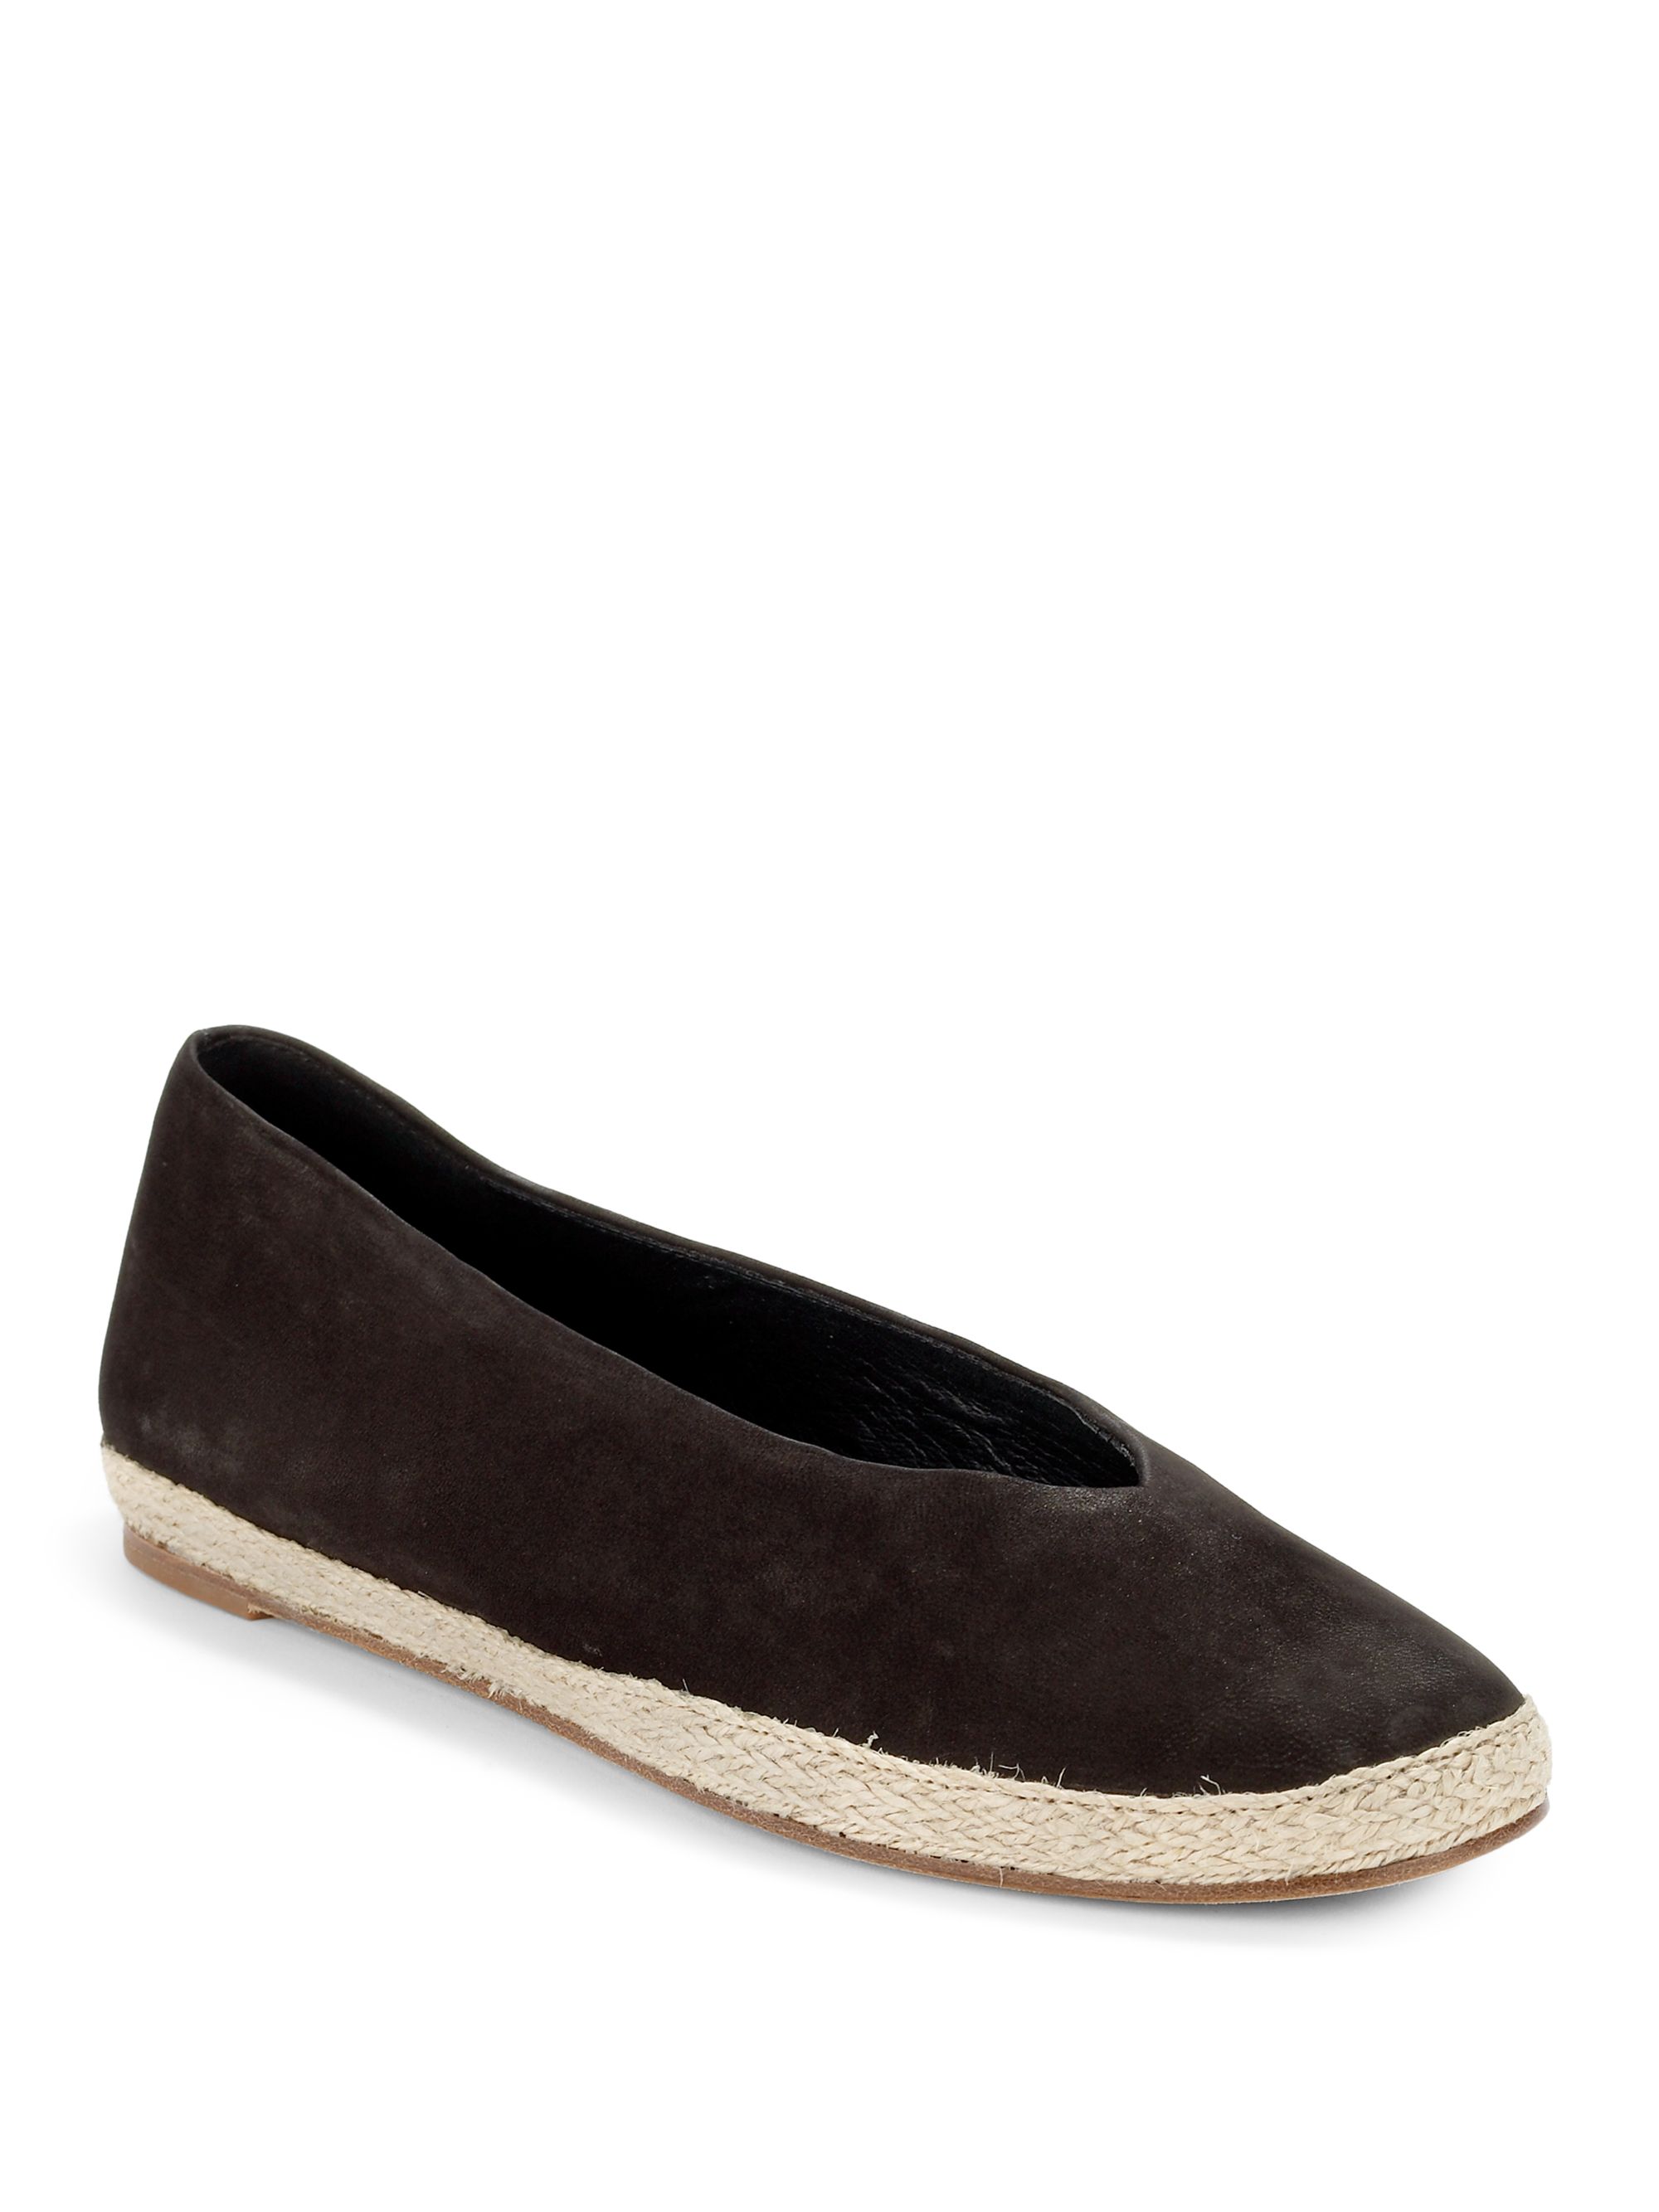 Eileen Fisher Tour Buffed Leather Espadrille Flats in